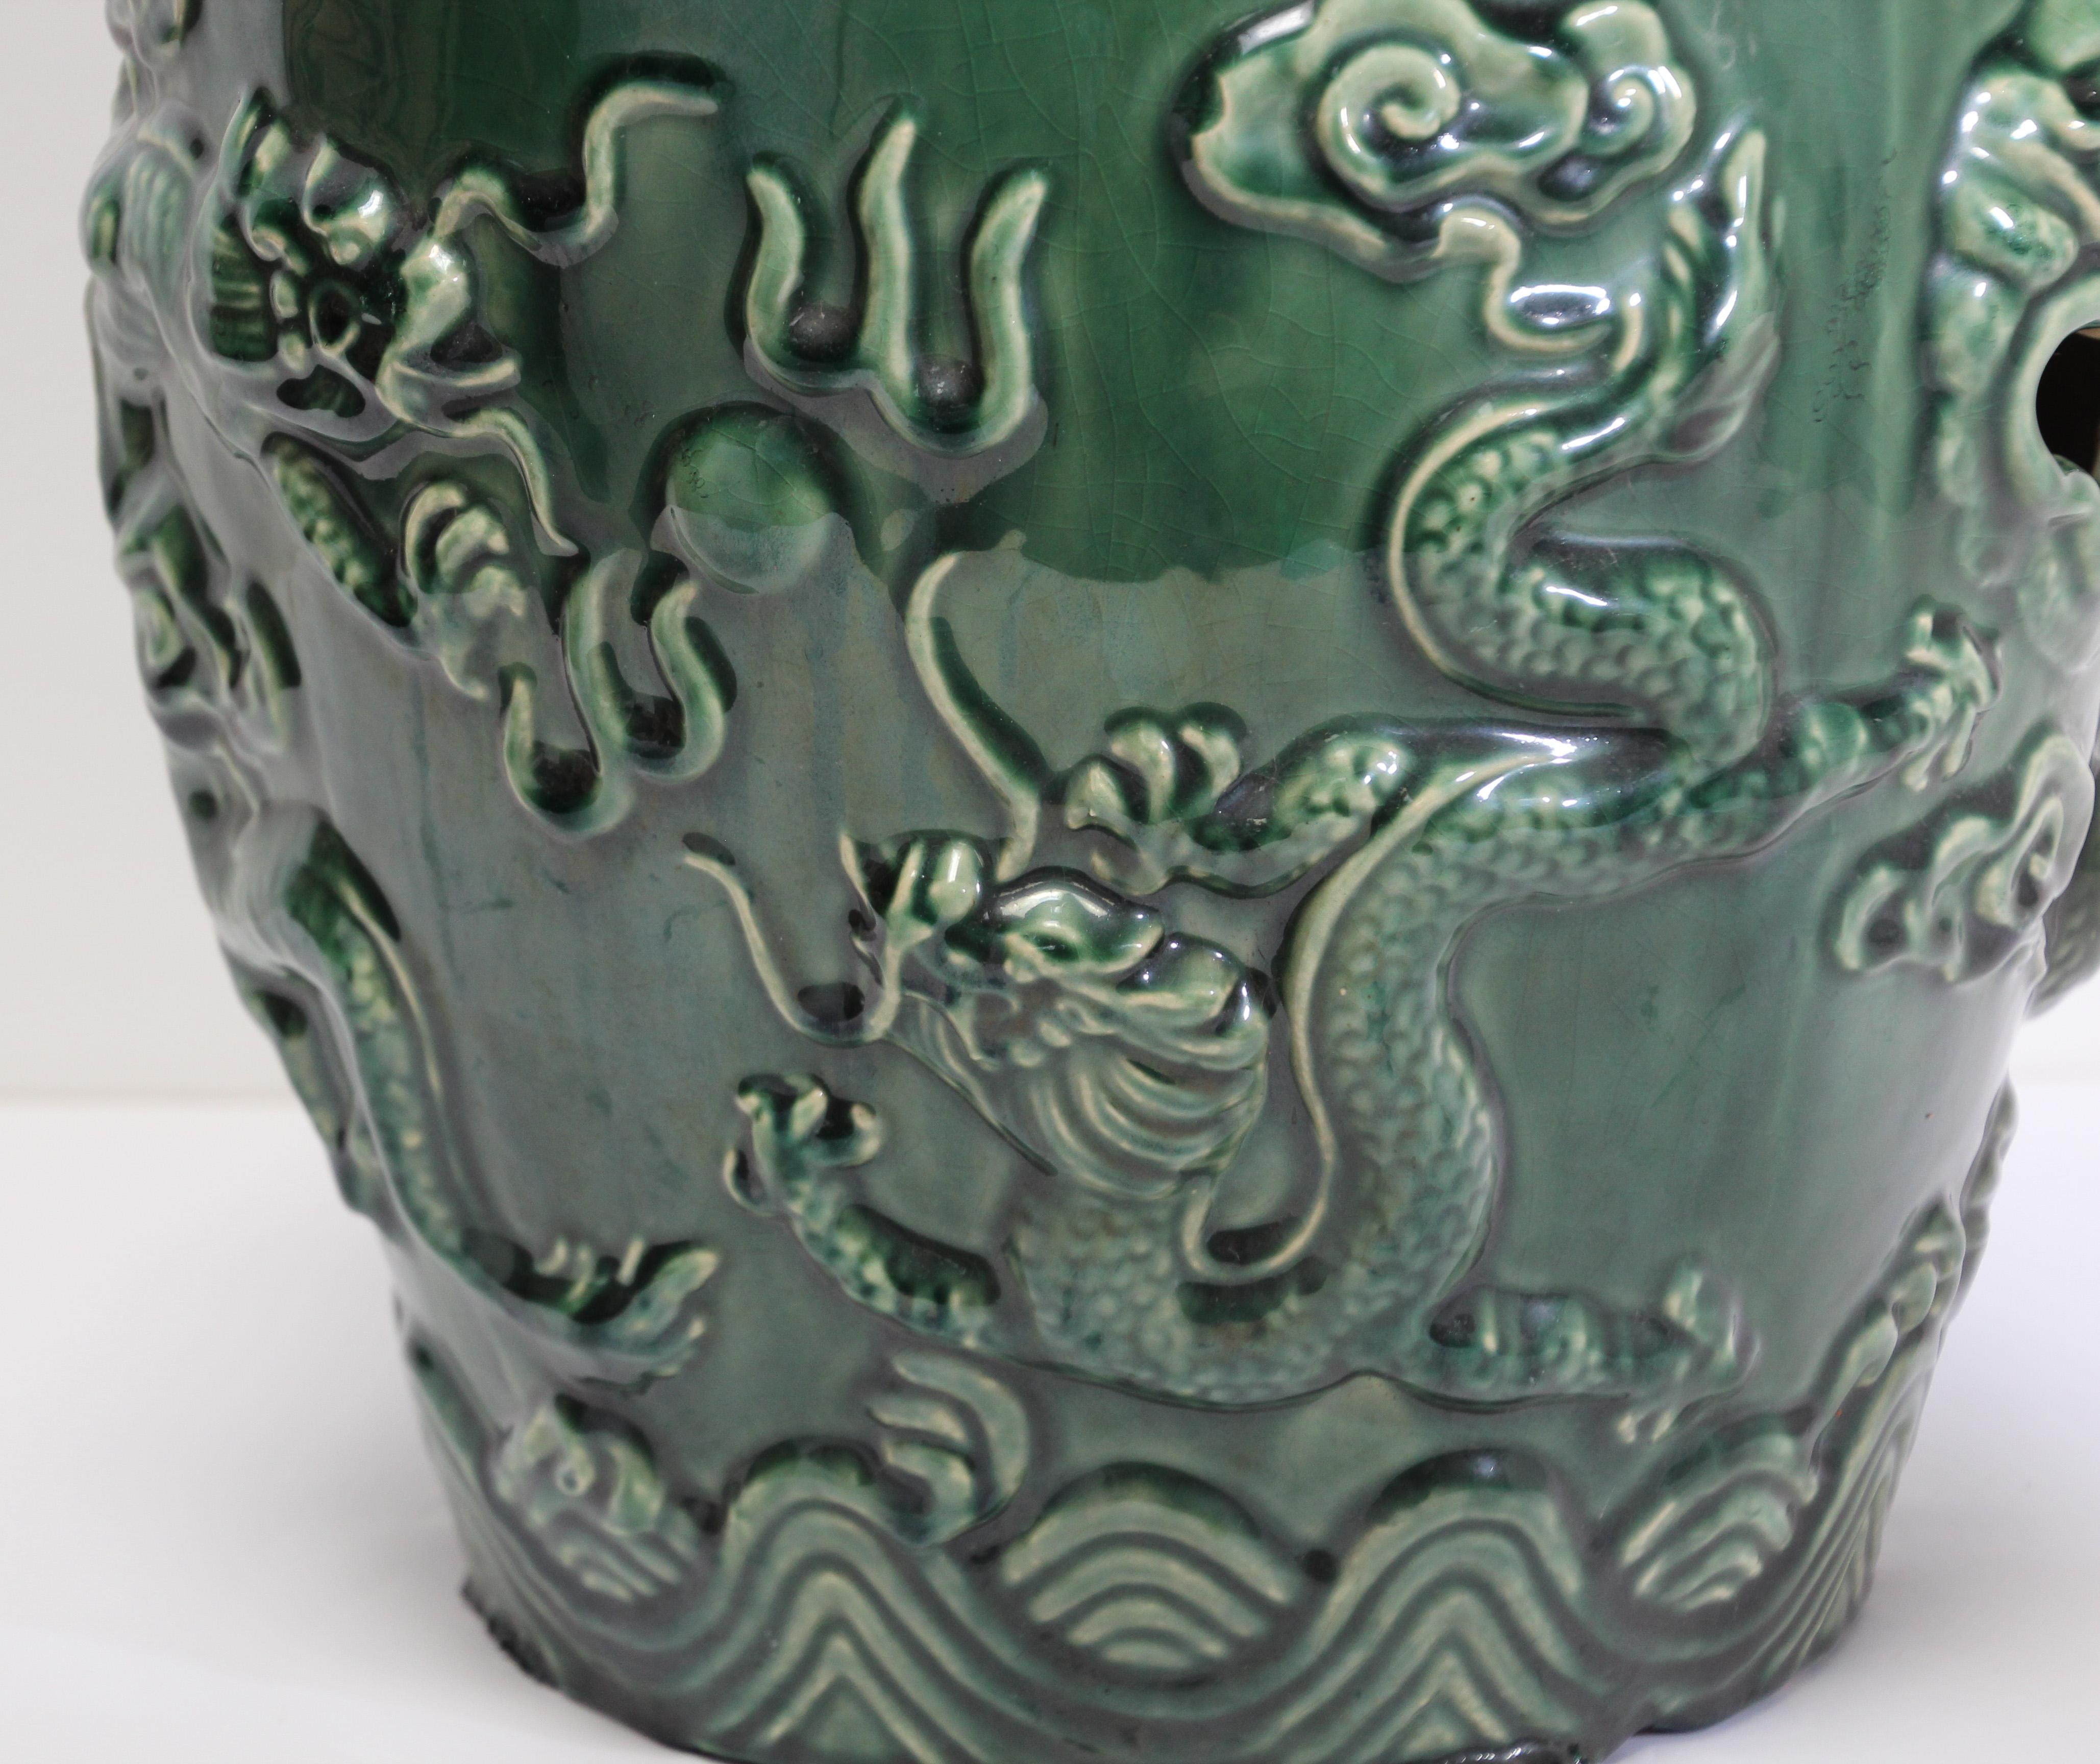 Emerald Green Chinese Ceramic Garden Stool with Dragons 8